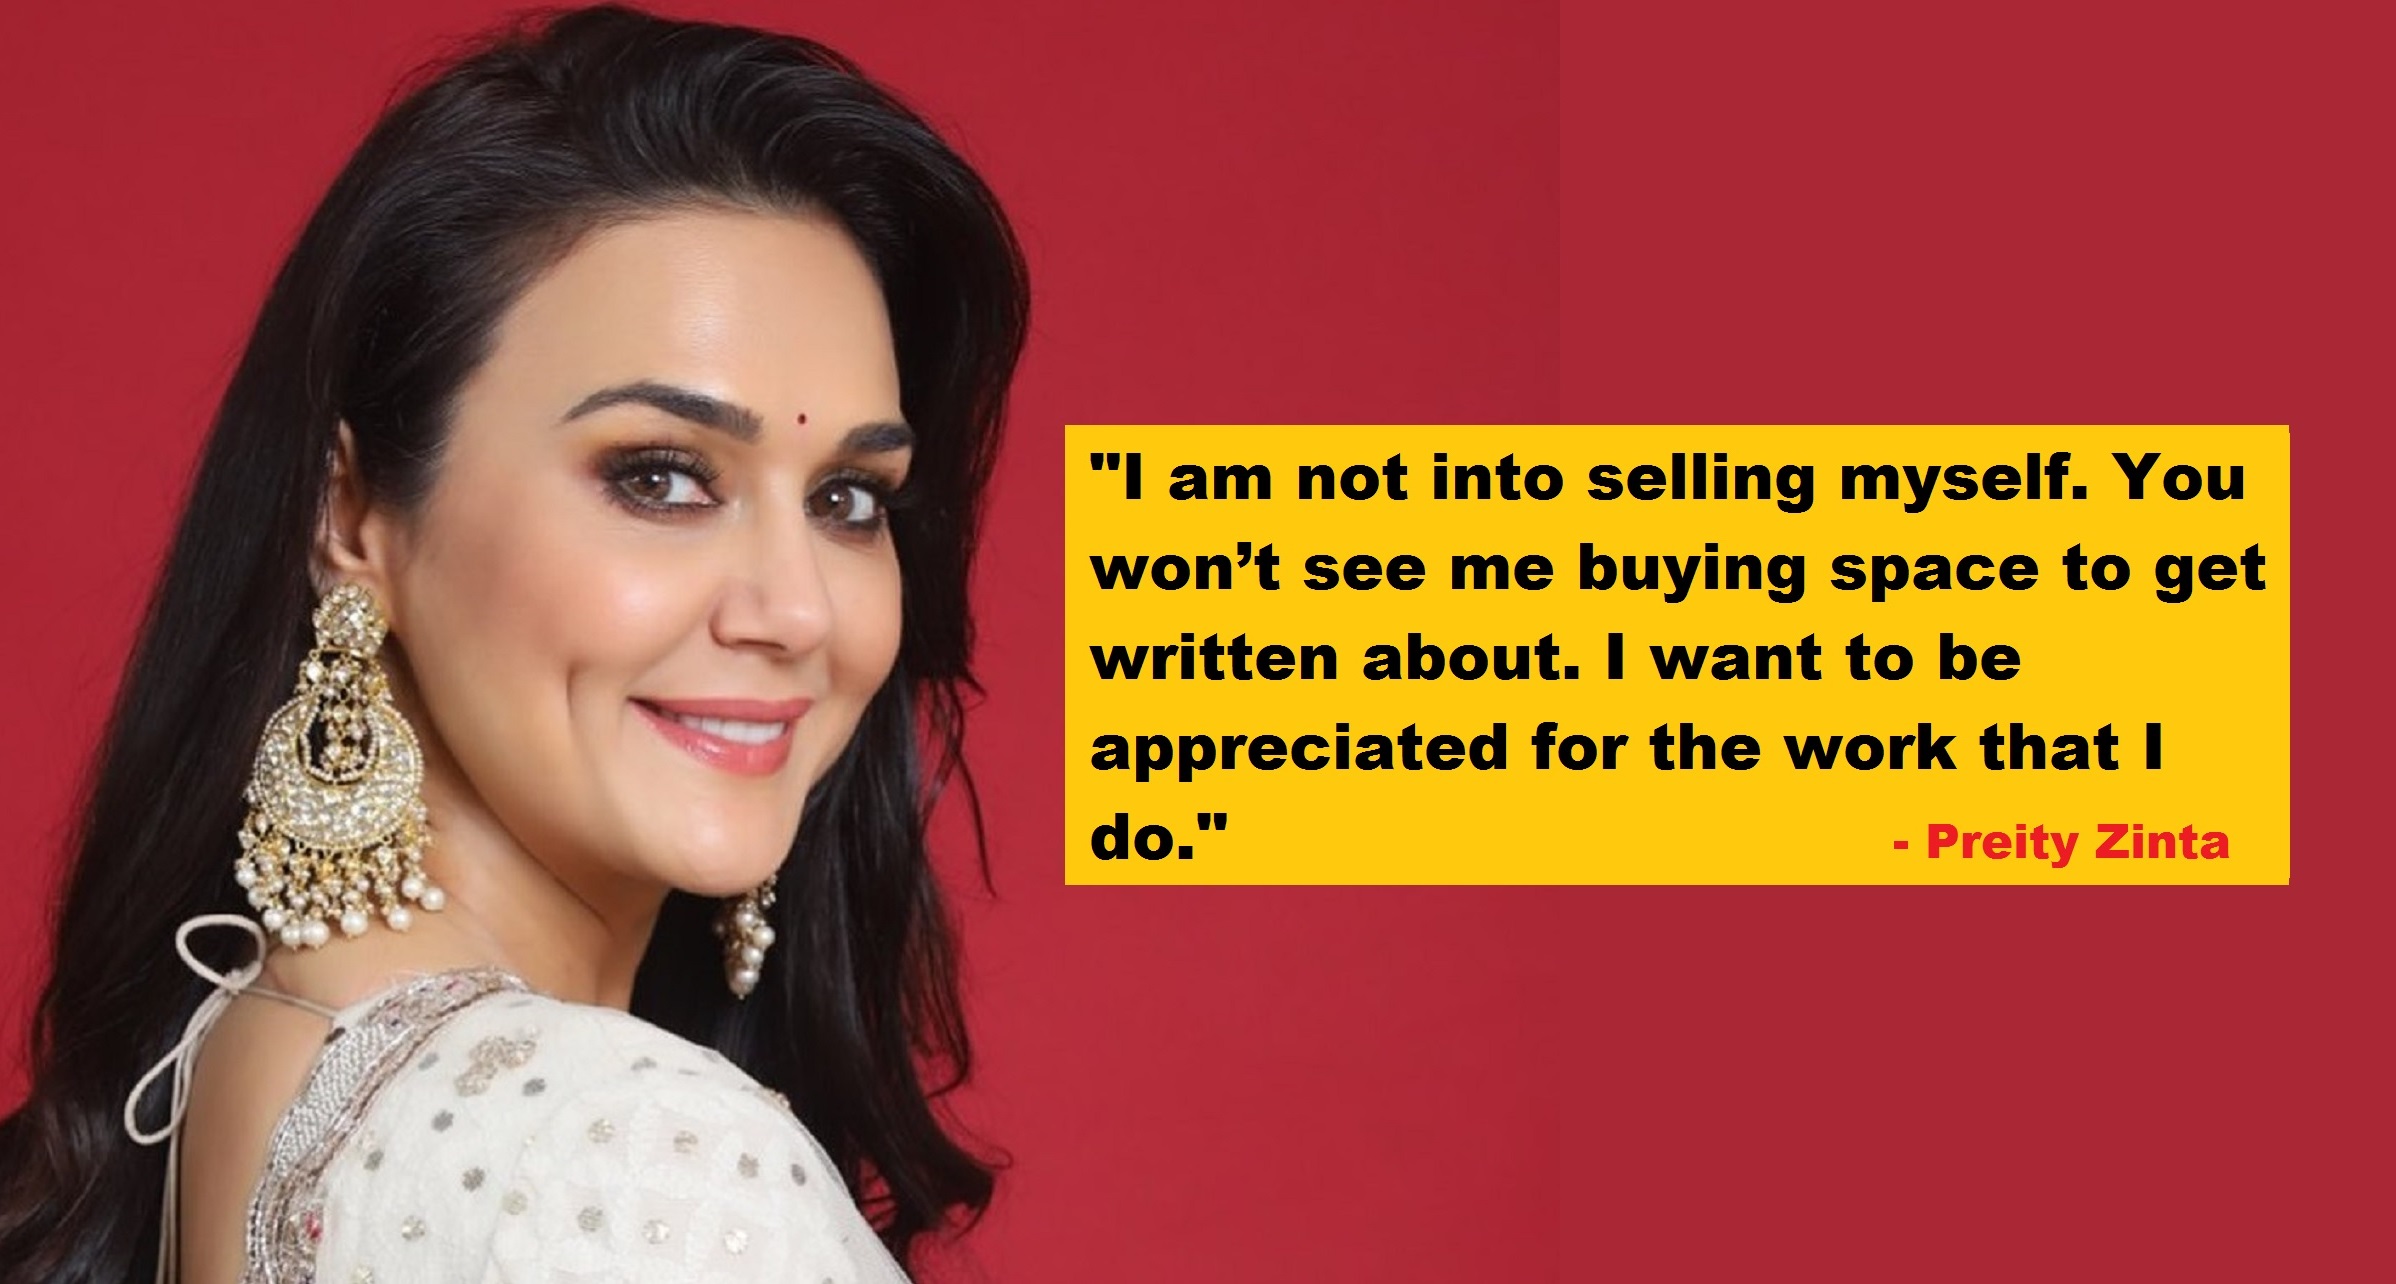 Preity Zinta Naked Photo - casting couch